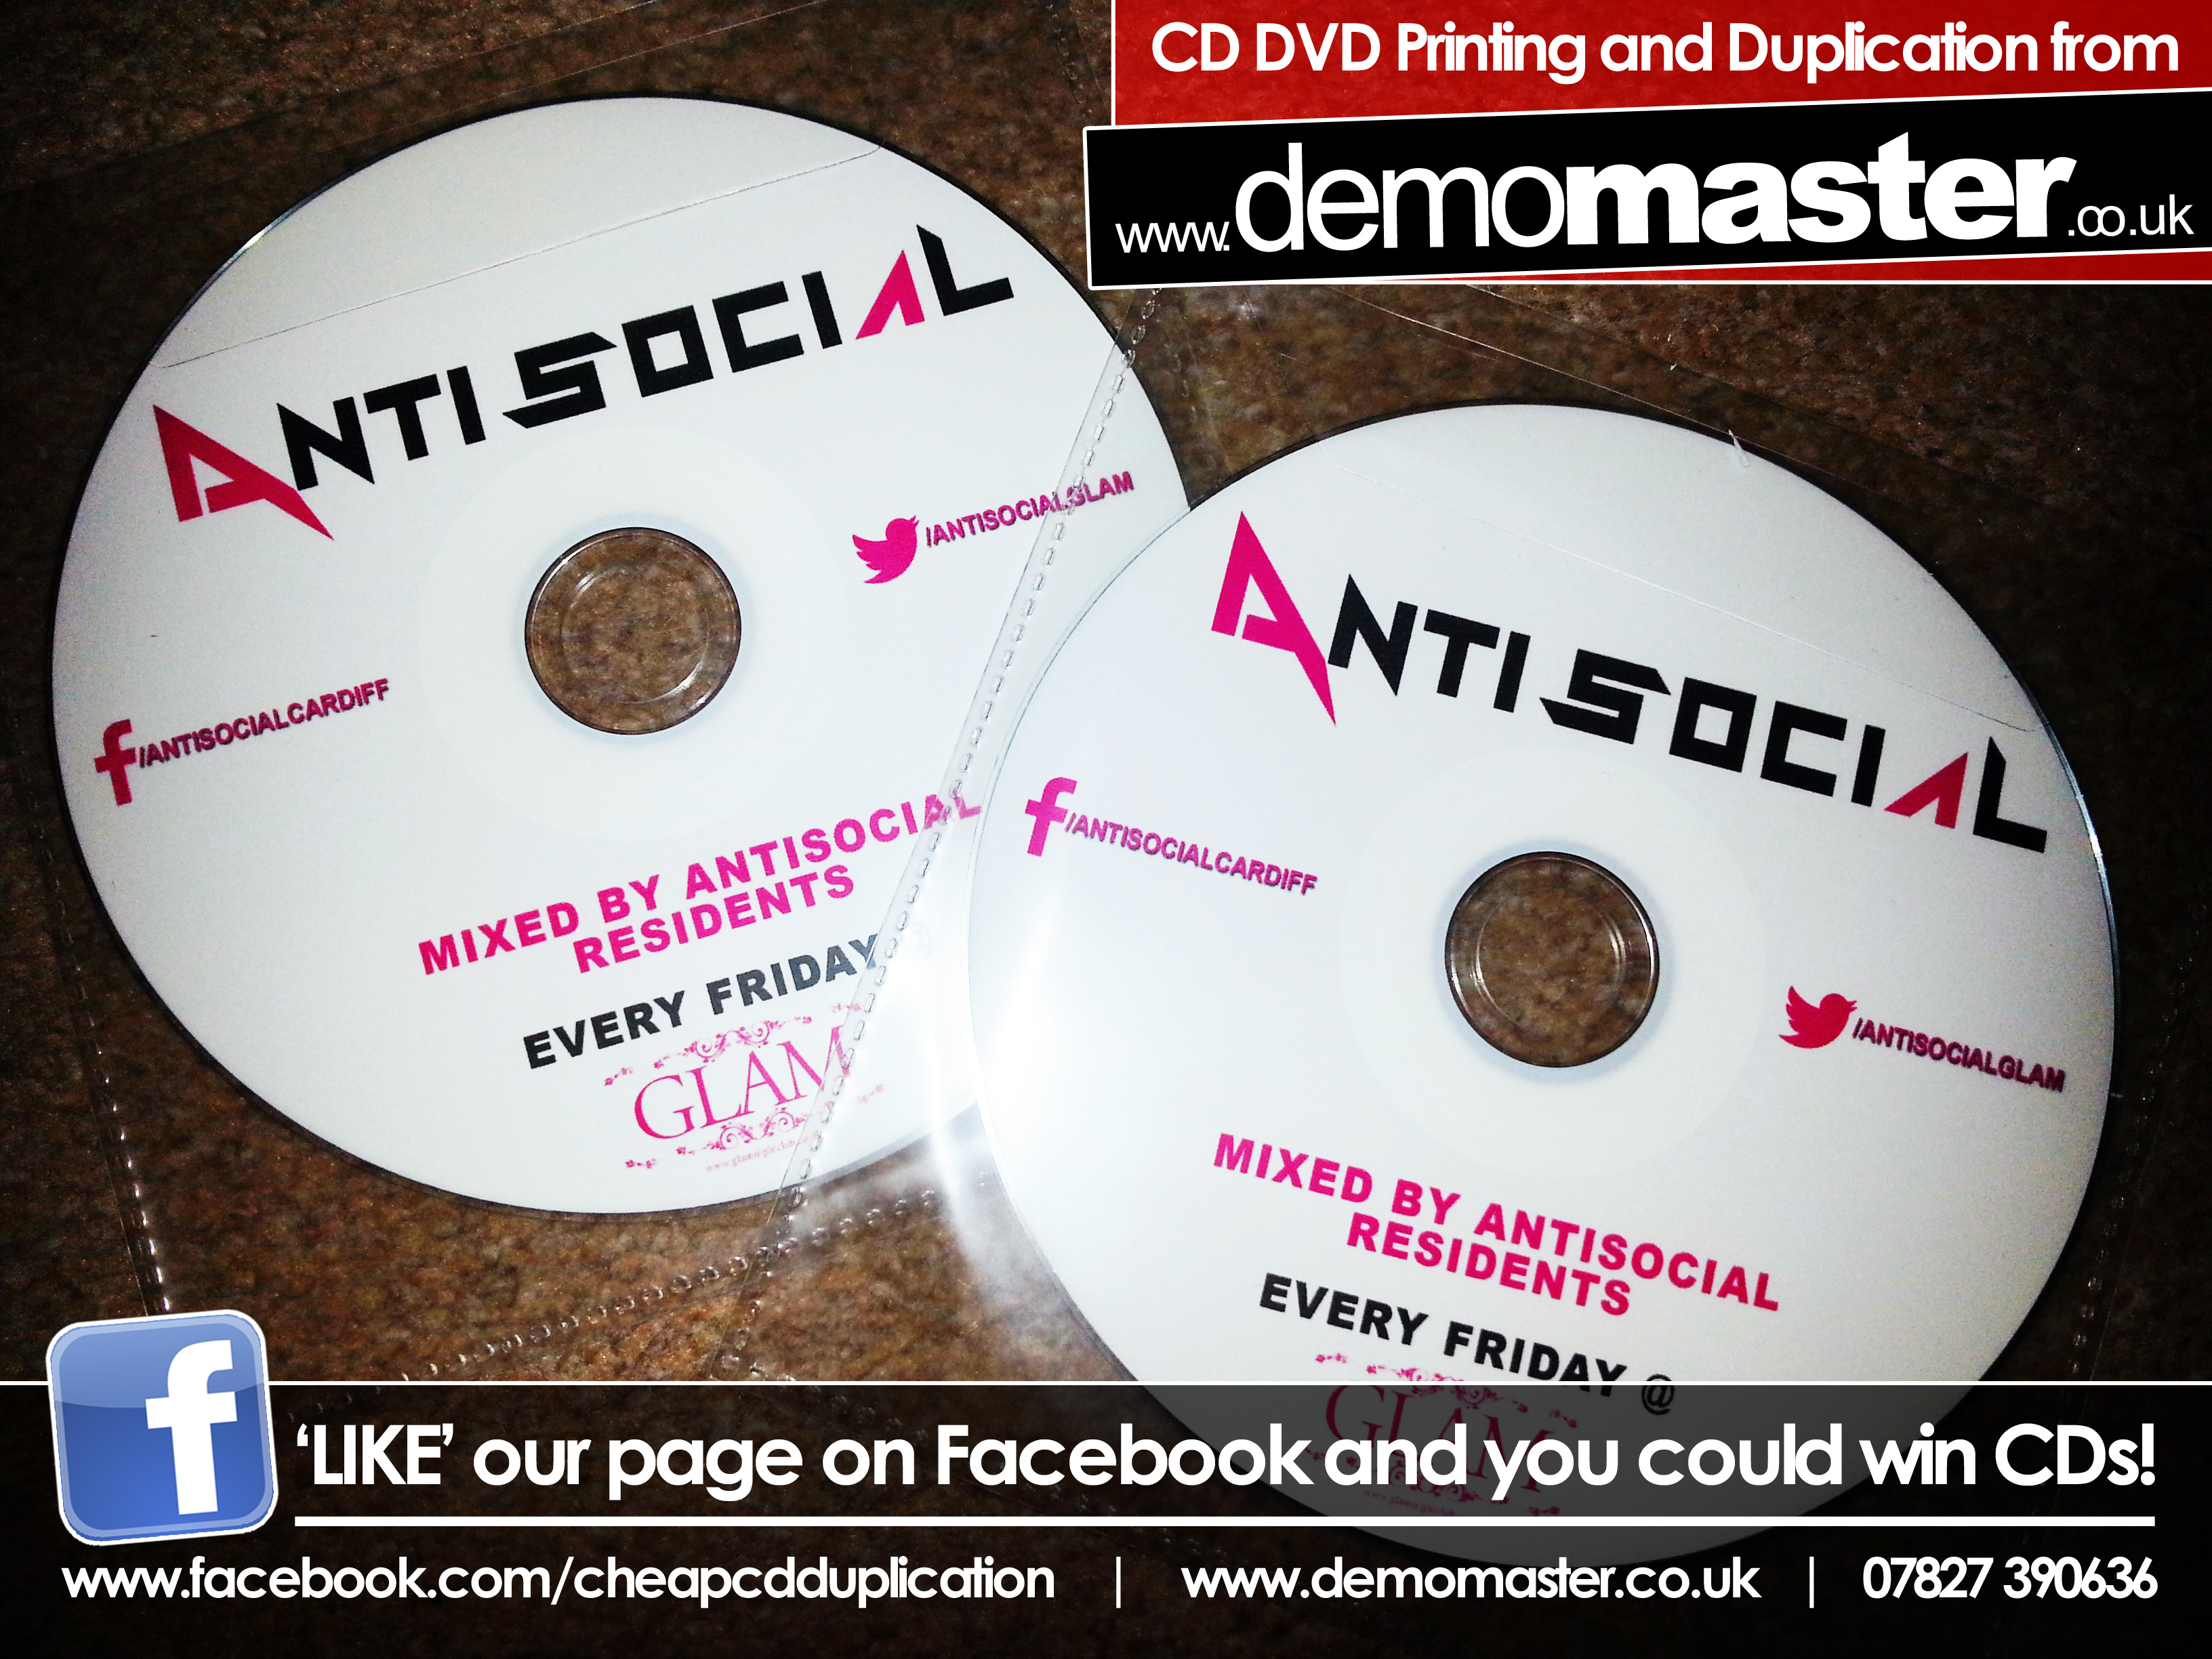 AntiSocial mixed by resident DJs